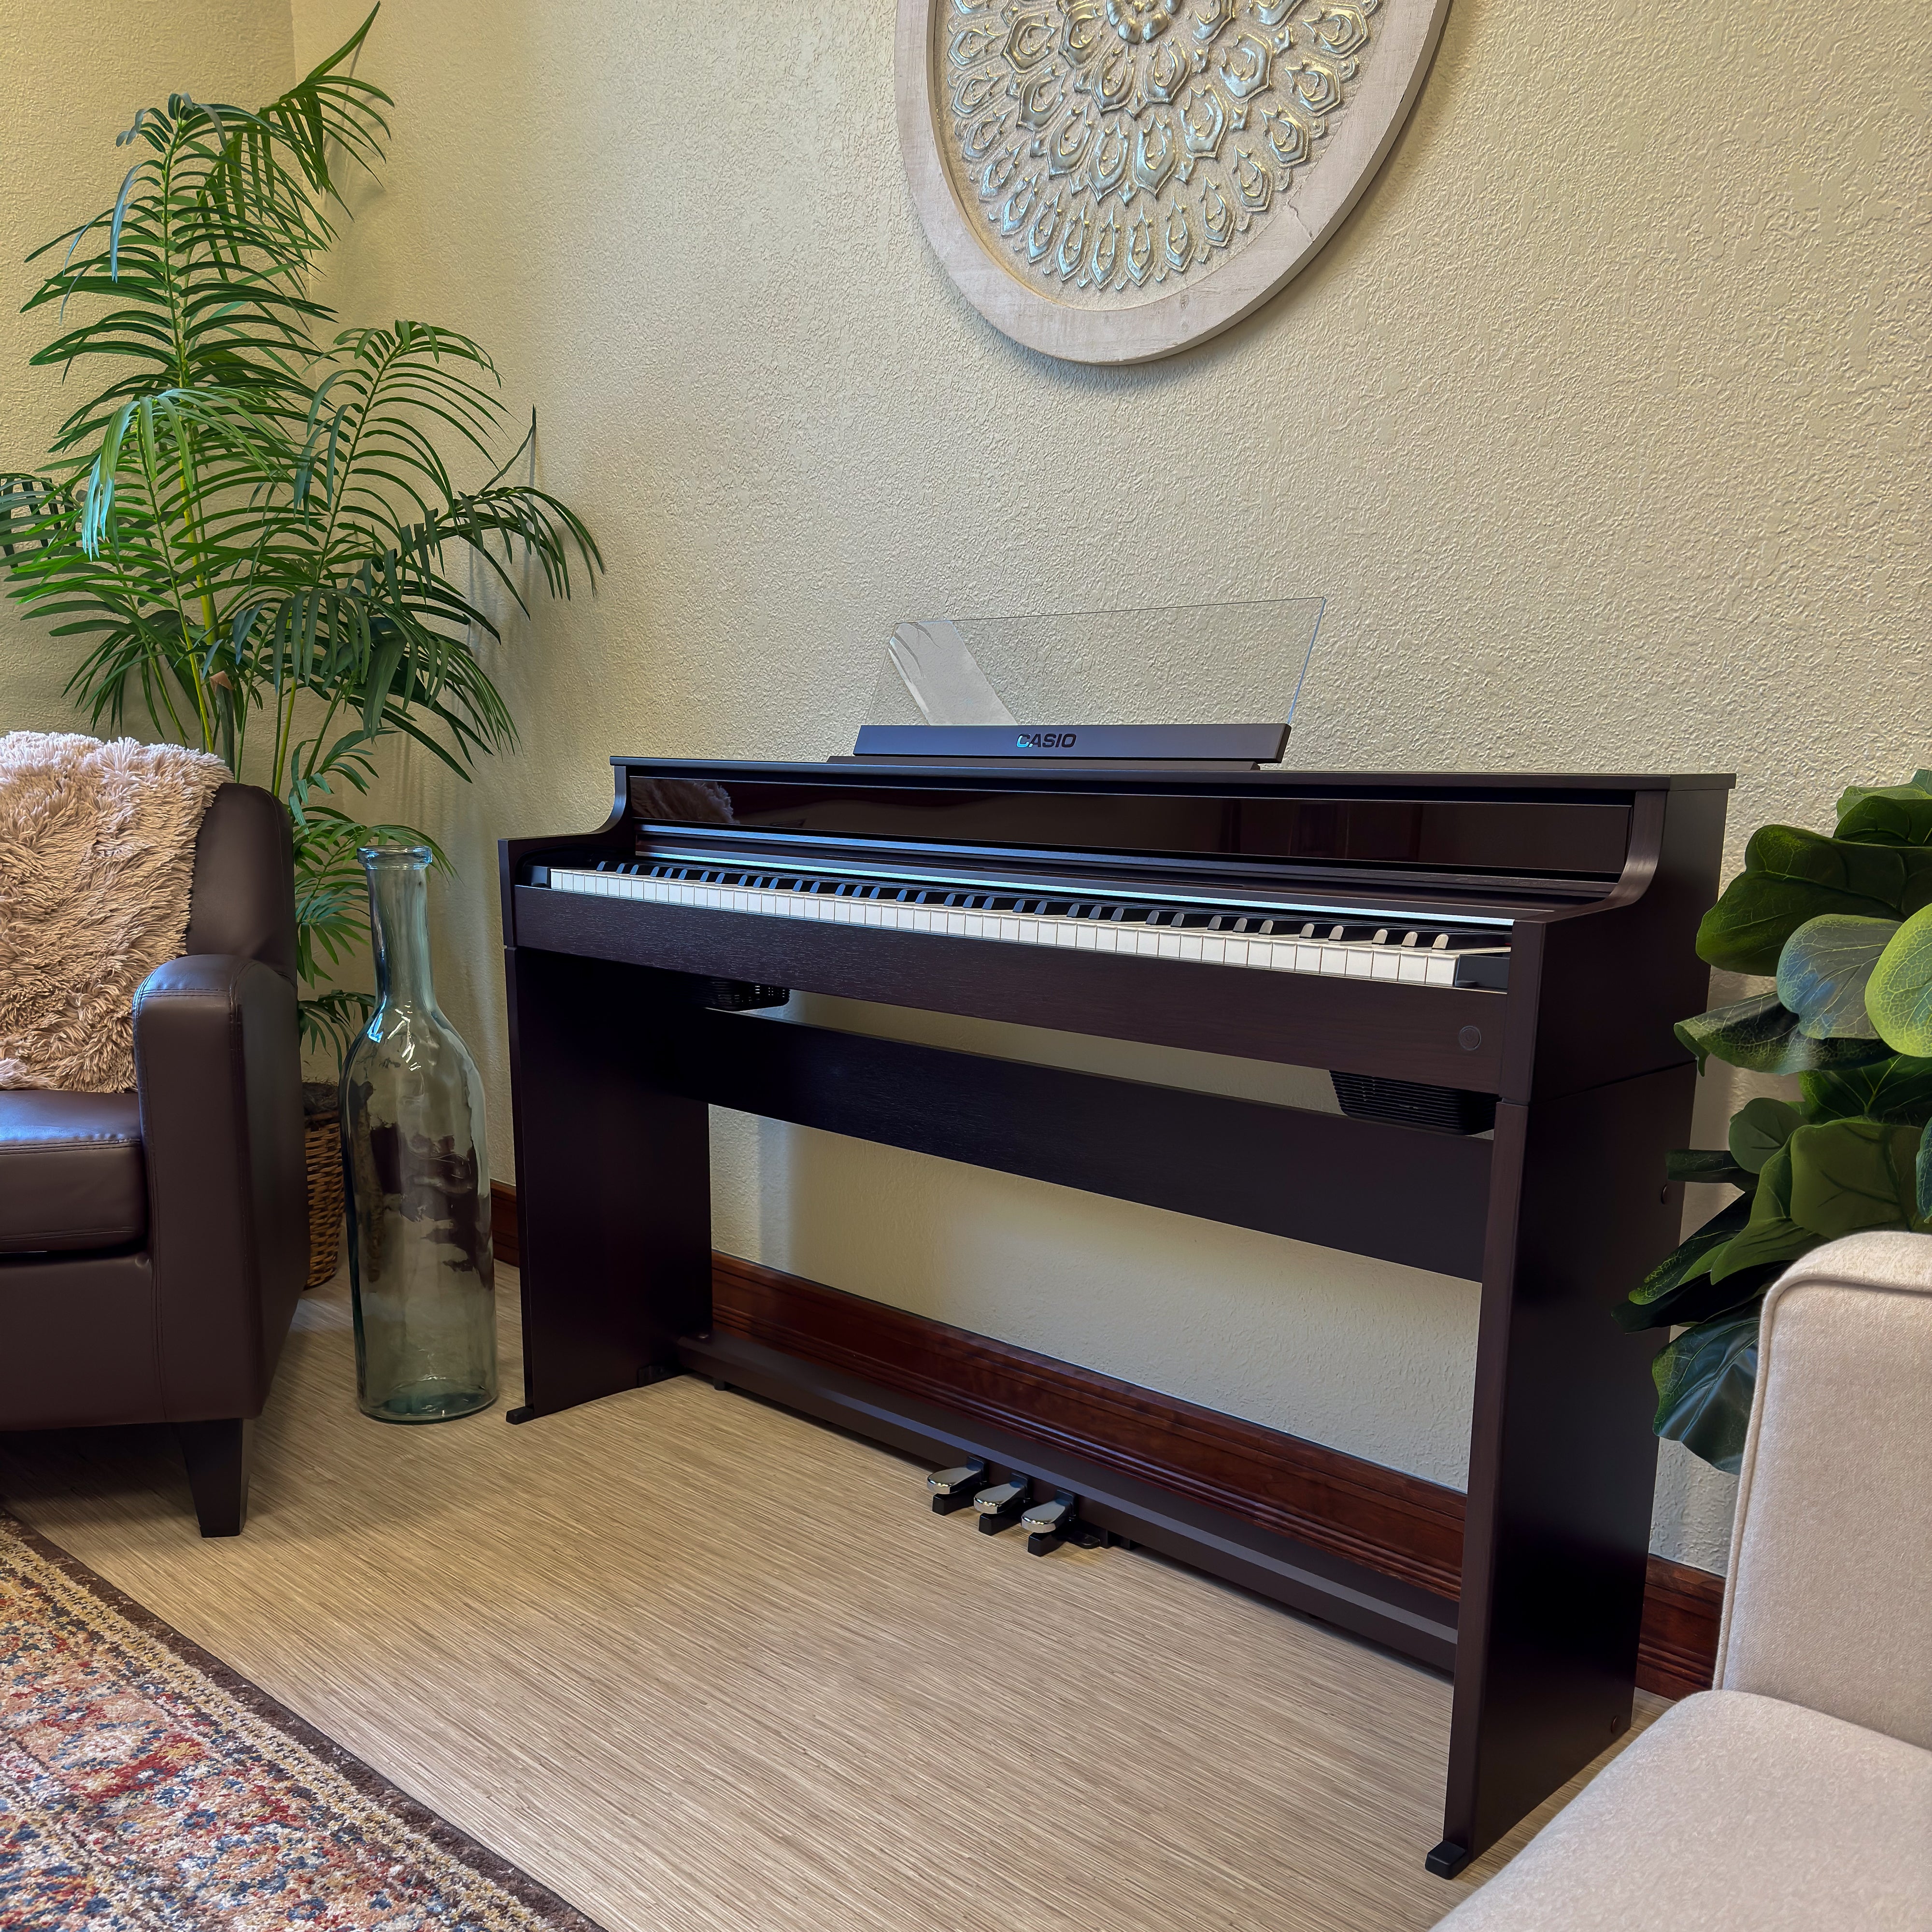 Casio Celviano AP-S450 Digital Piano - Rosewood - in a stylish living room